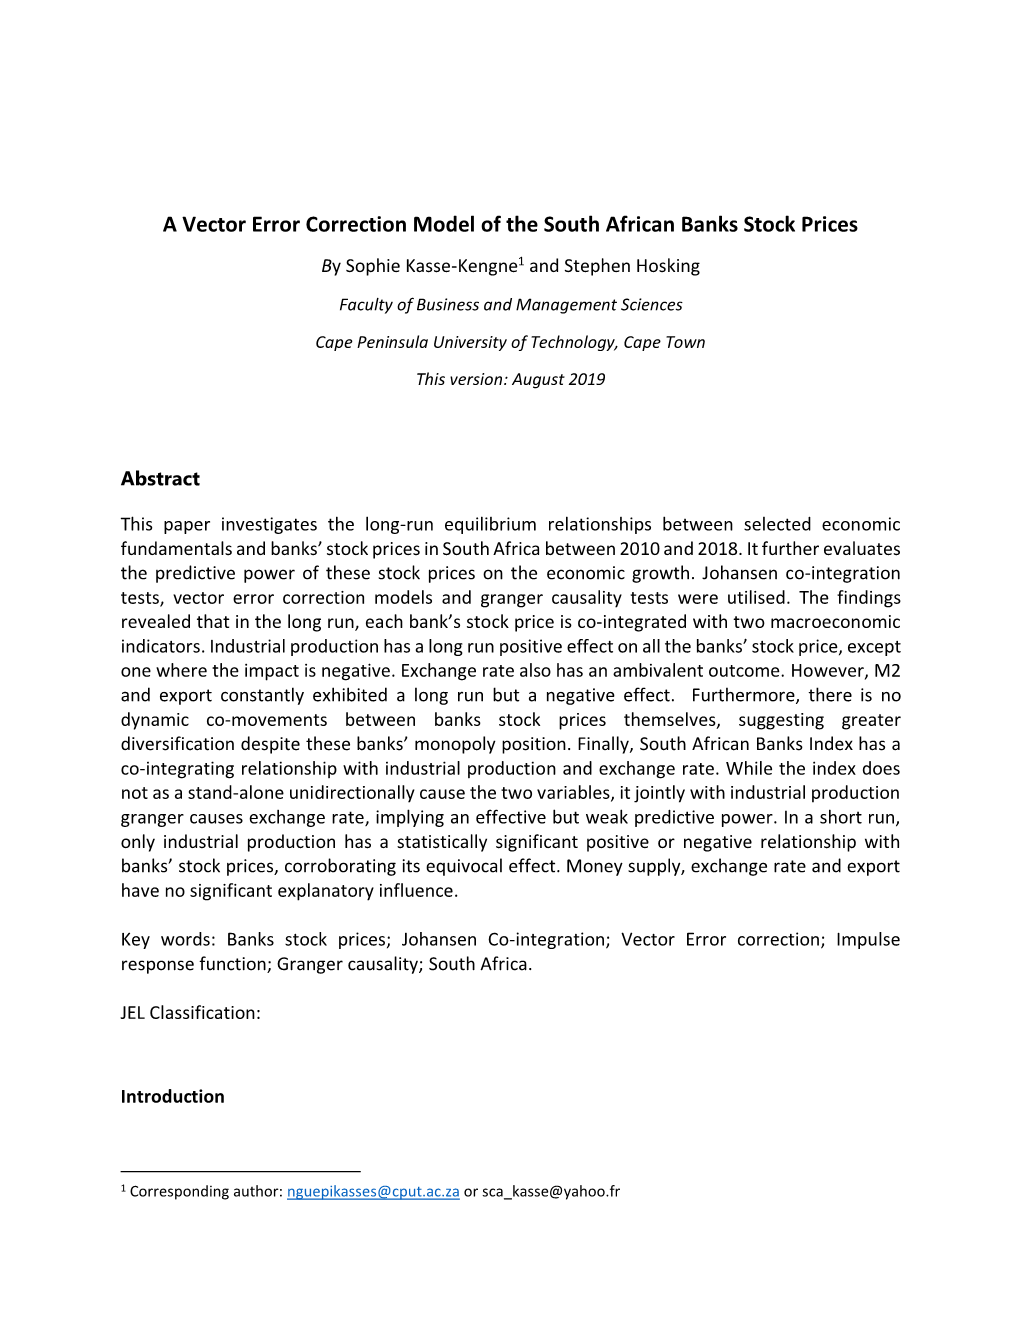 A Vector Error Correction Model of the South African Banks Stock Prices by Sophie Kasse-Kengne1 and Stephen Hosking